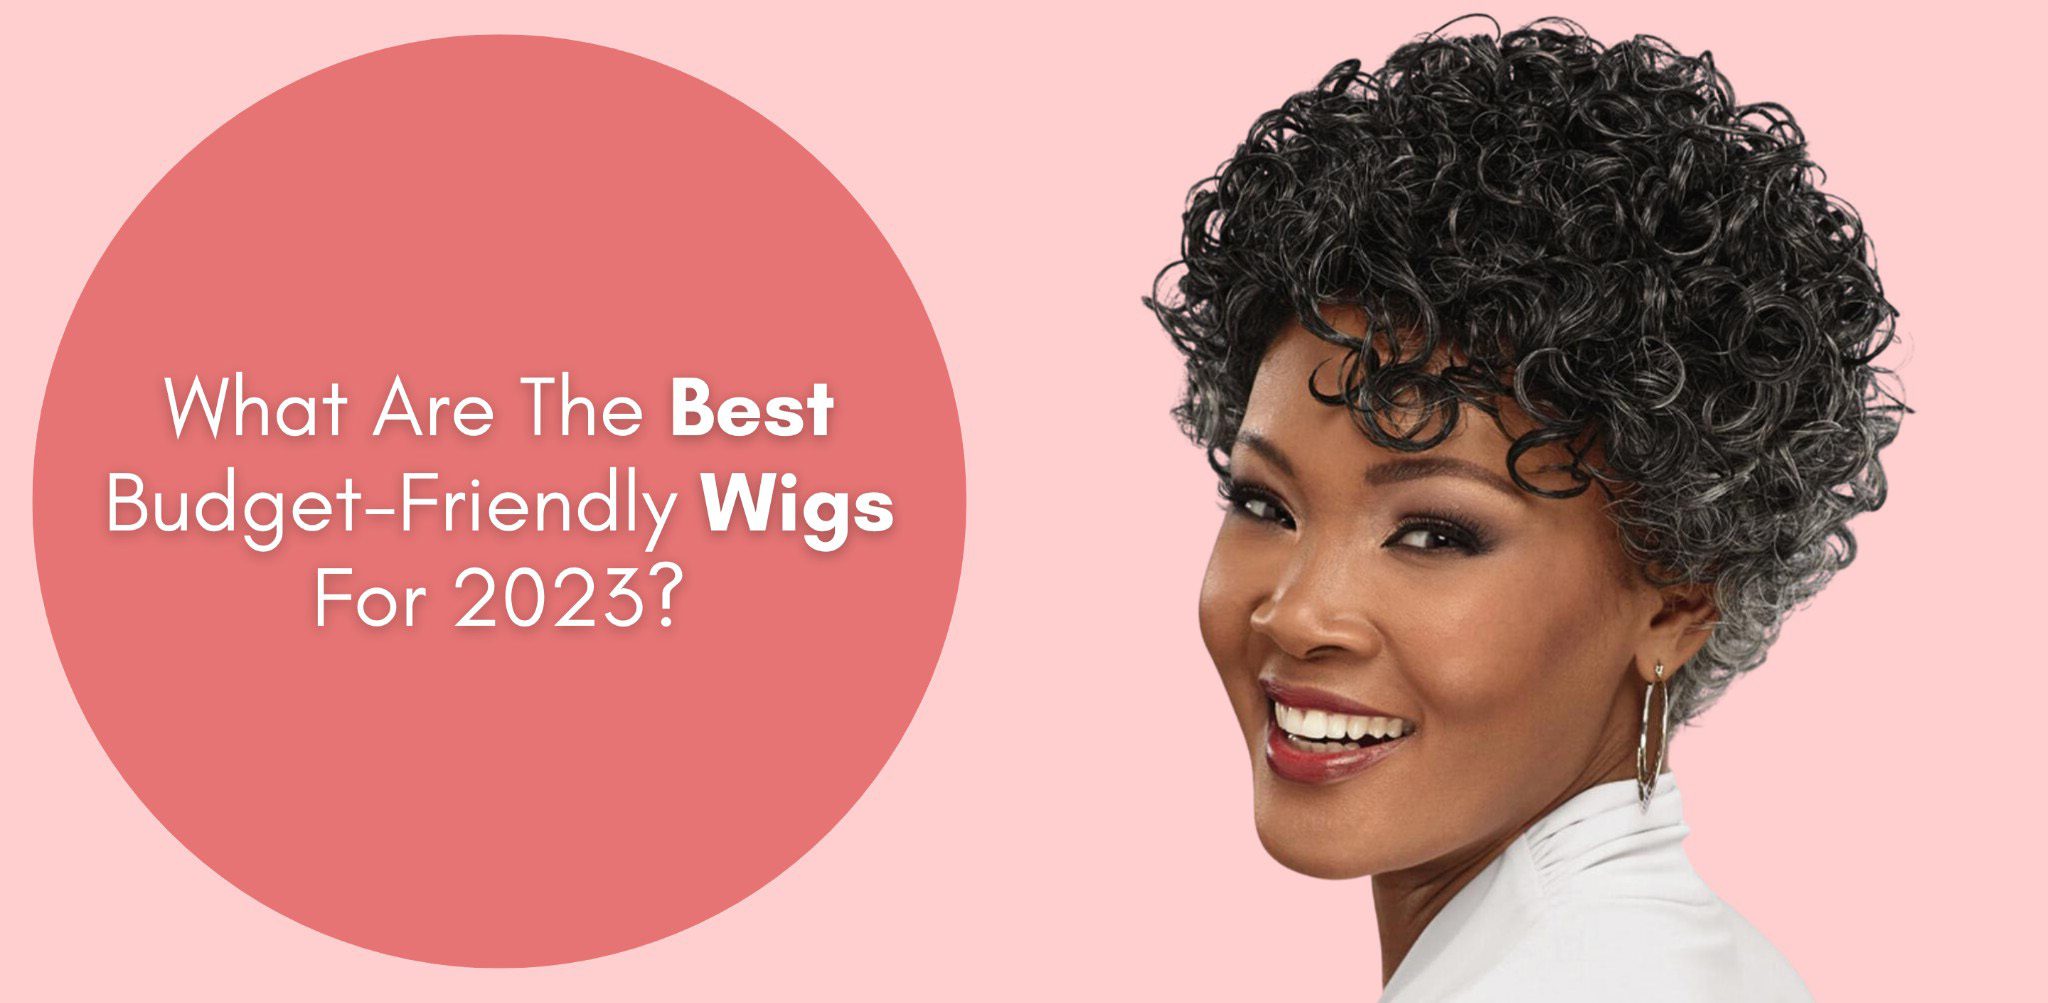 what are the best budget-friendly wigs for 2023